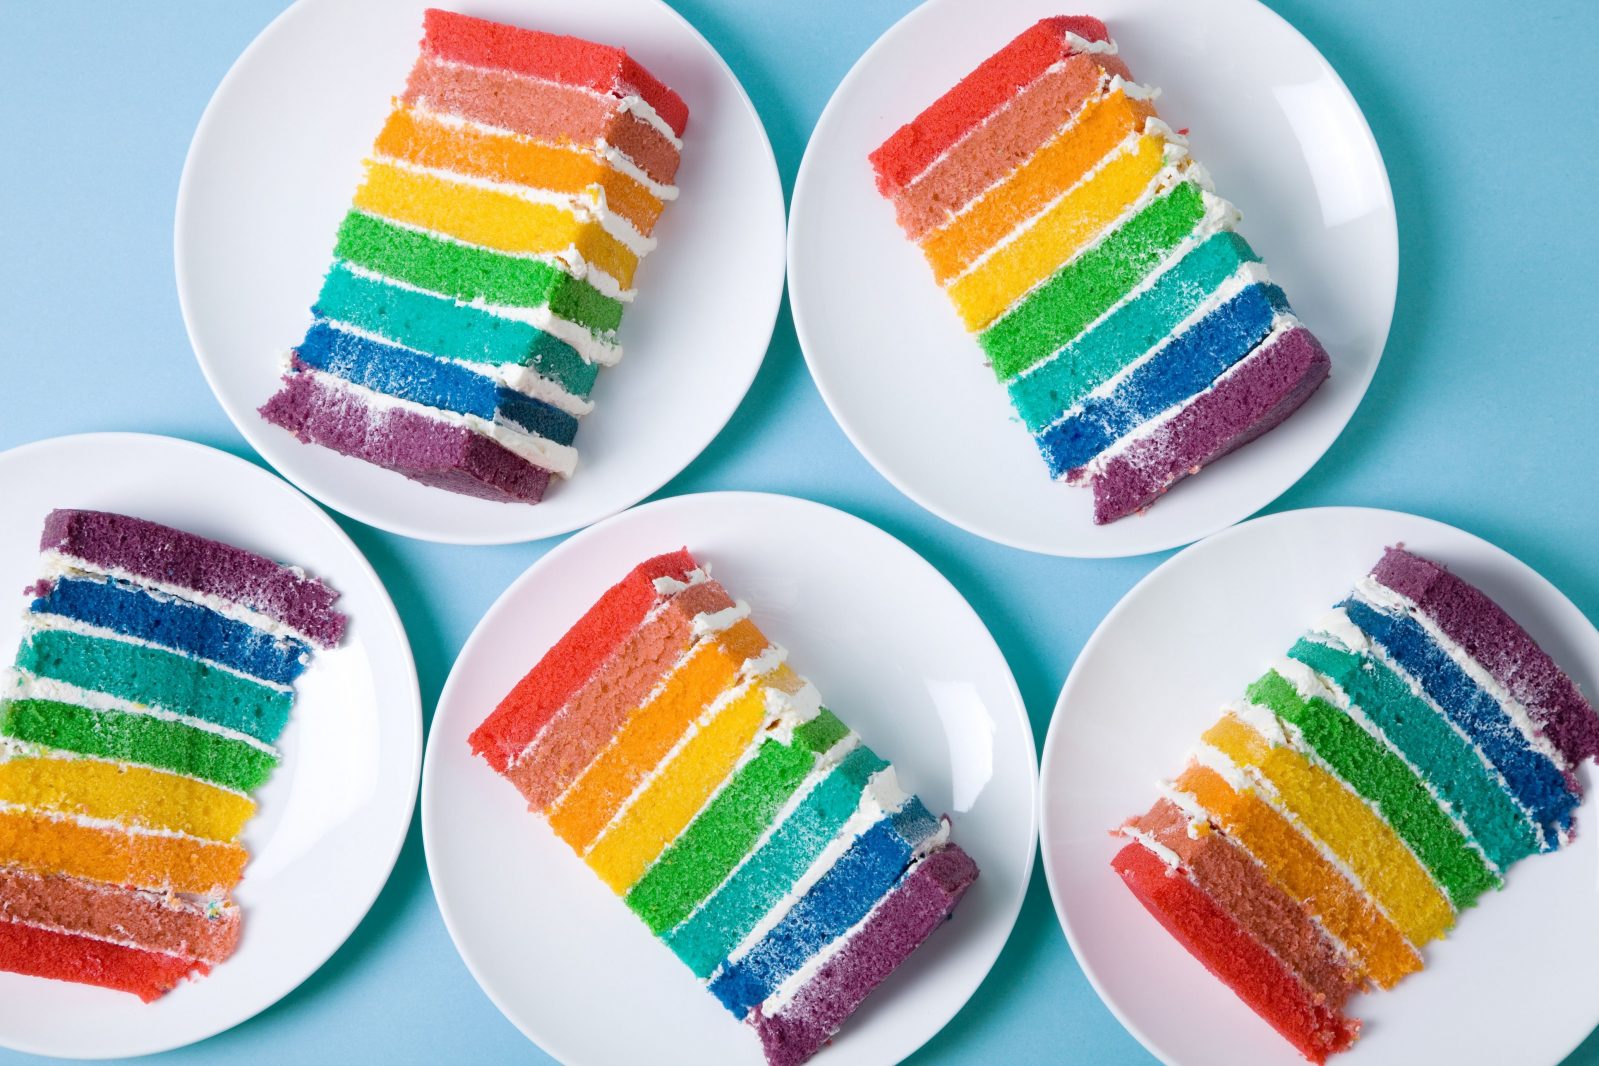 Can We Guess Your Age Based on Your Hipster Food Choices? Rainbow cake